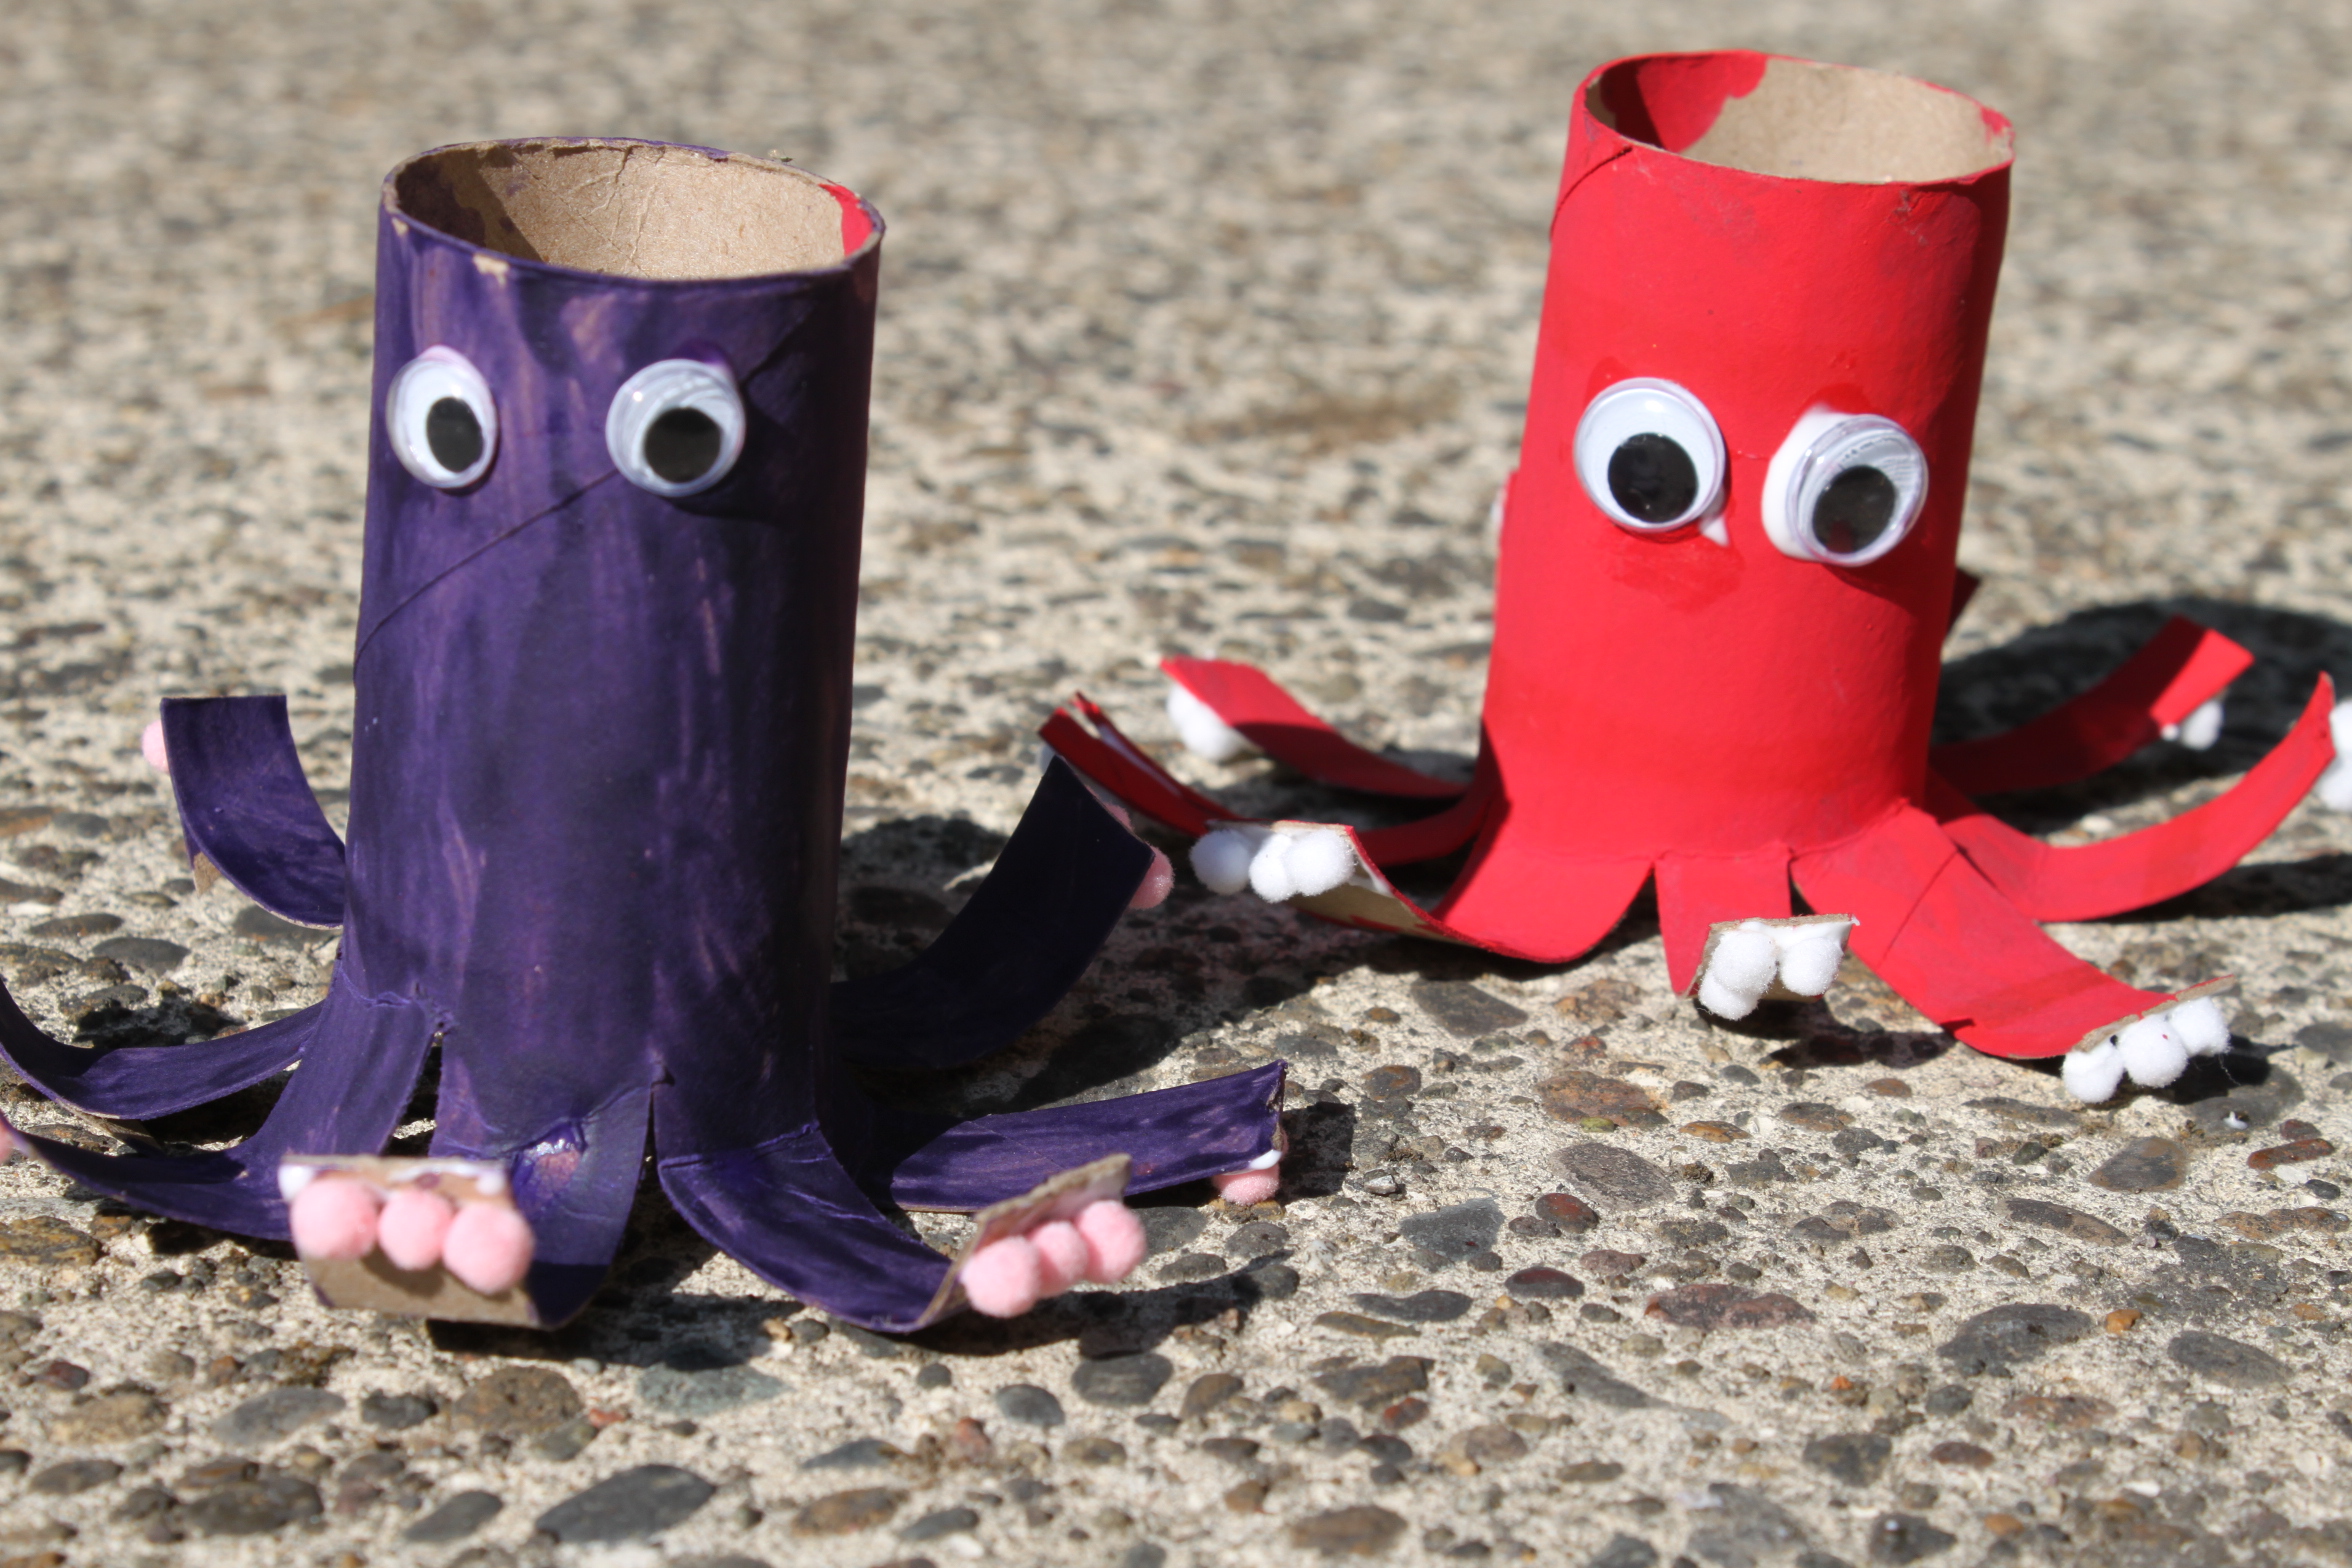 4 Ways Daycare Centers Can Reuse Old Toilet Paper Rolls for Arts